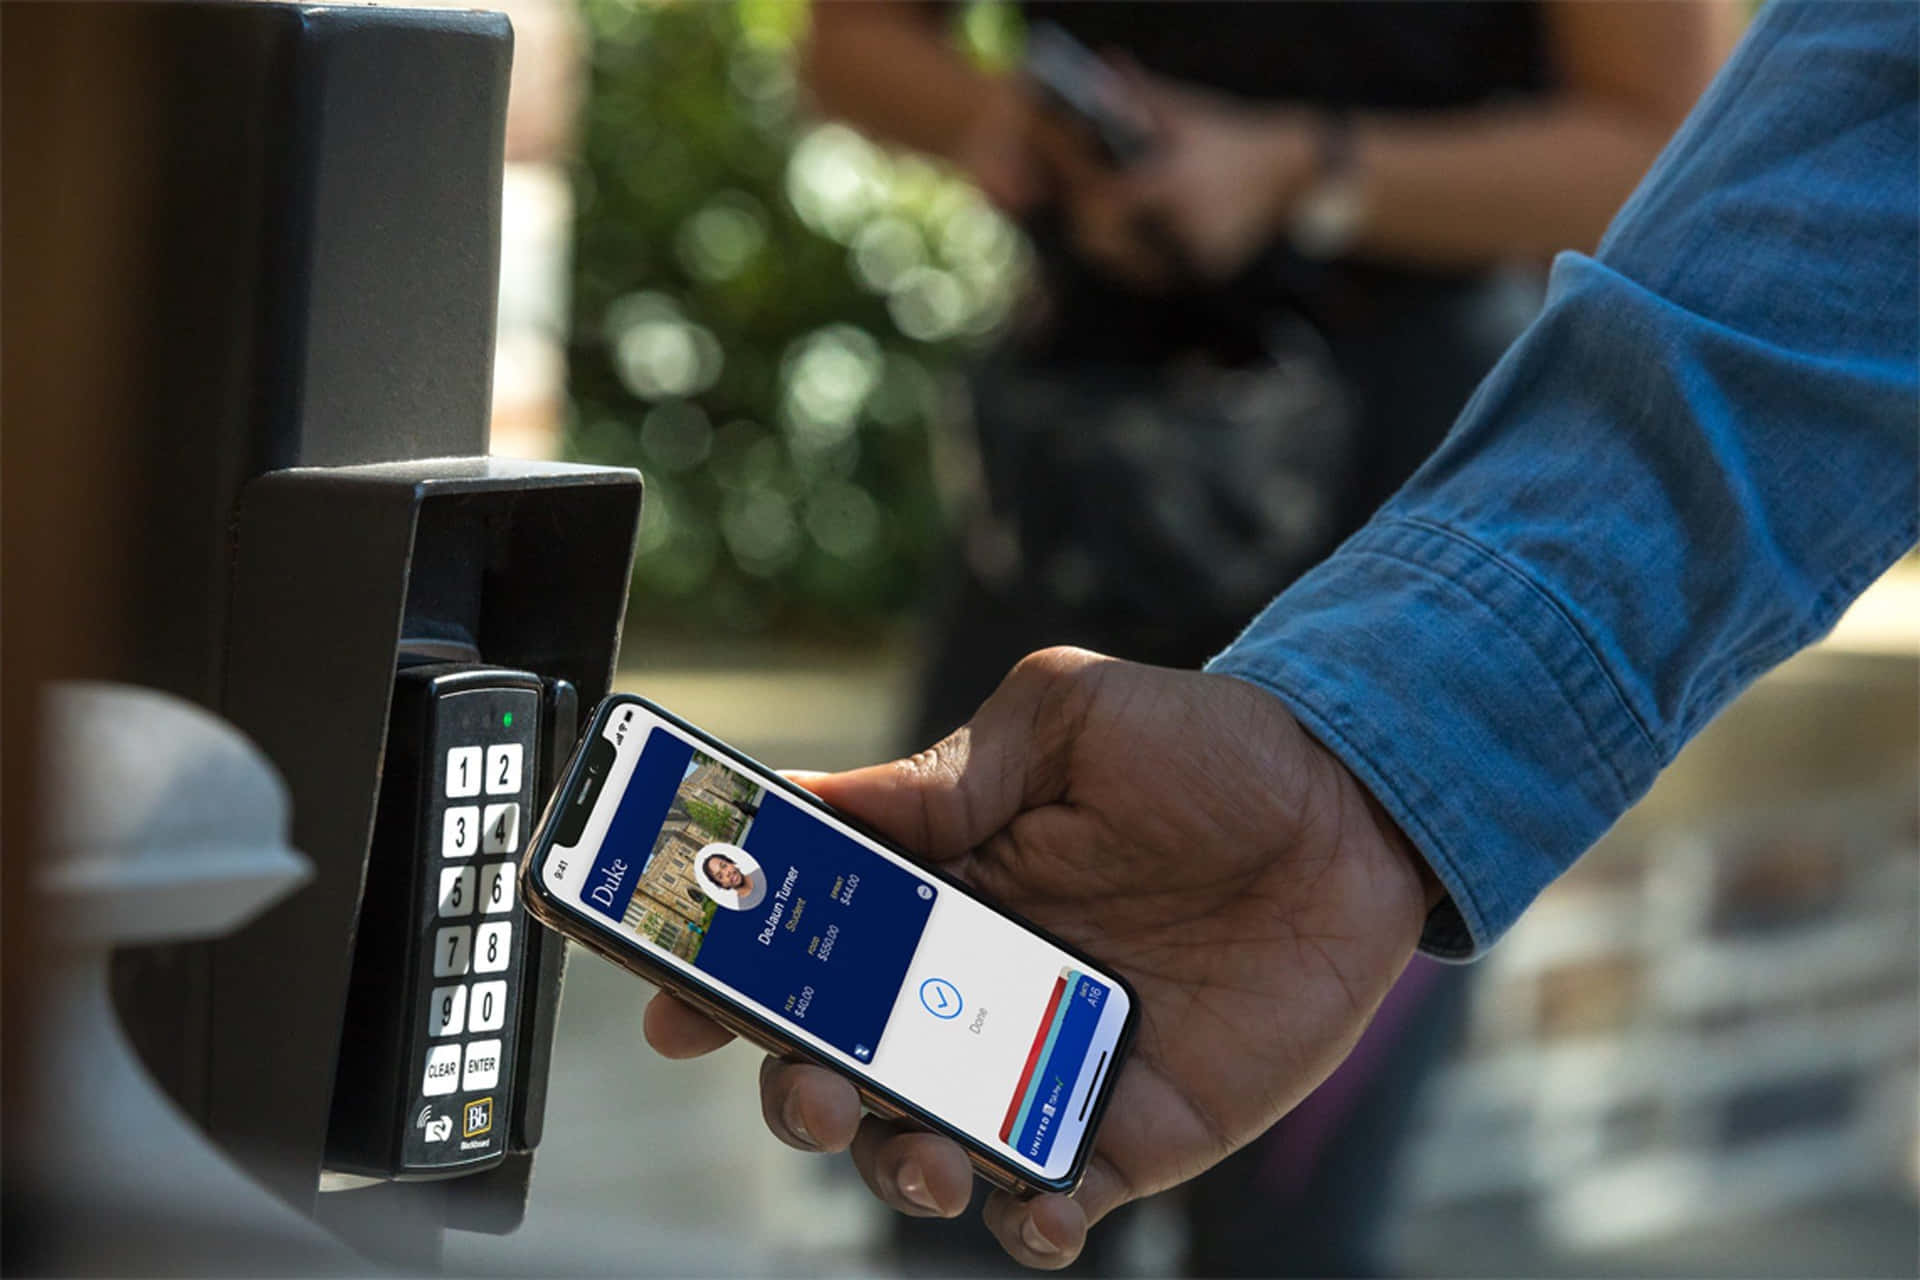 "Swipe into convenience with Apple Pay"